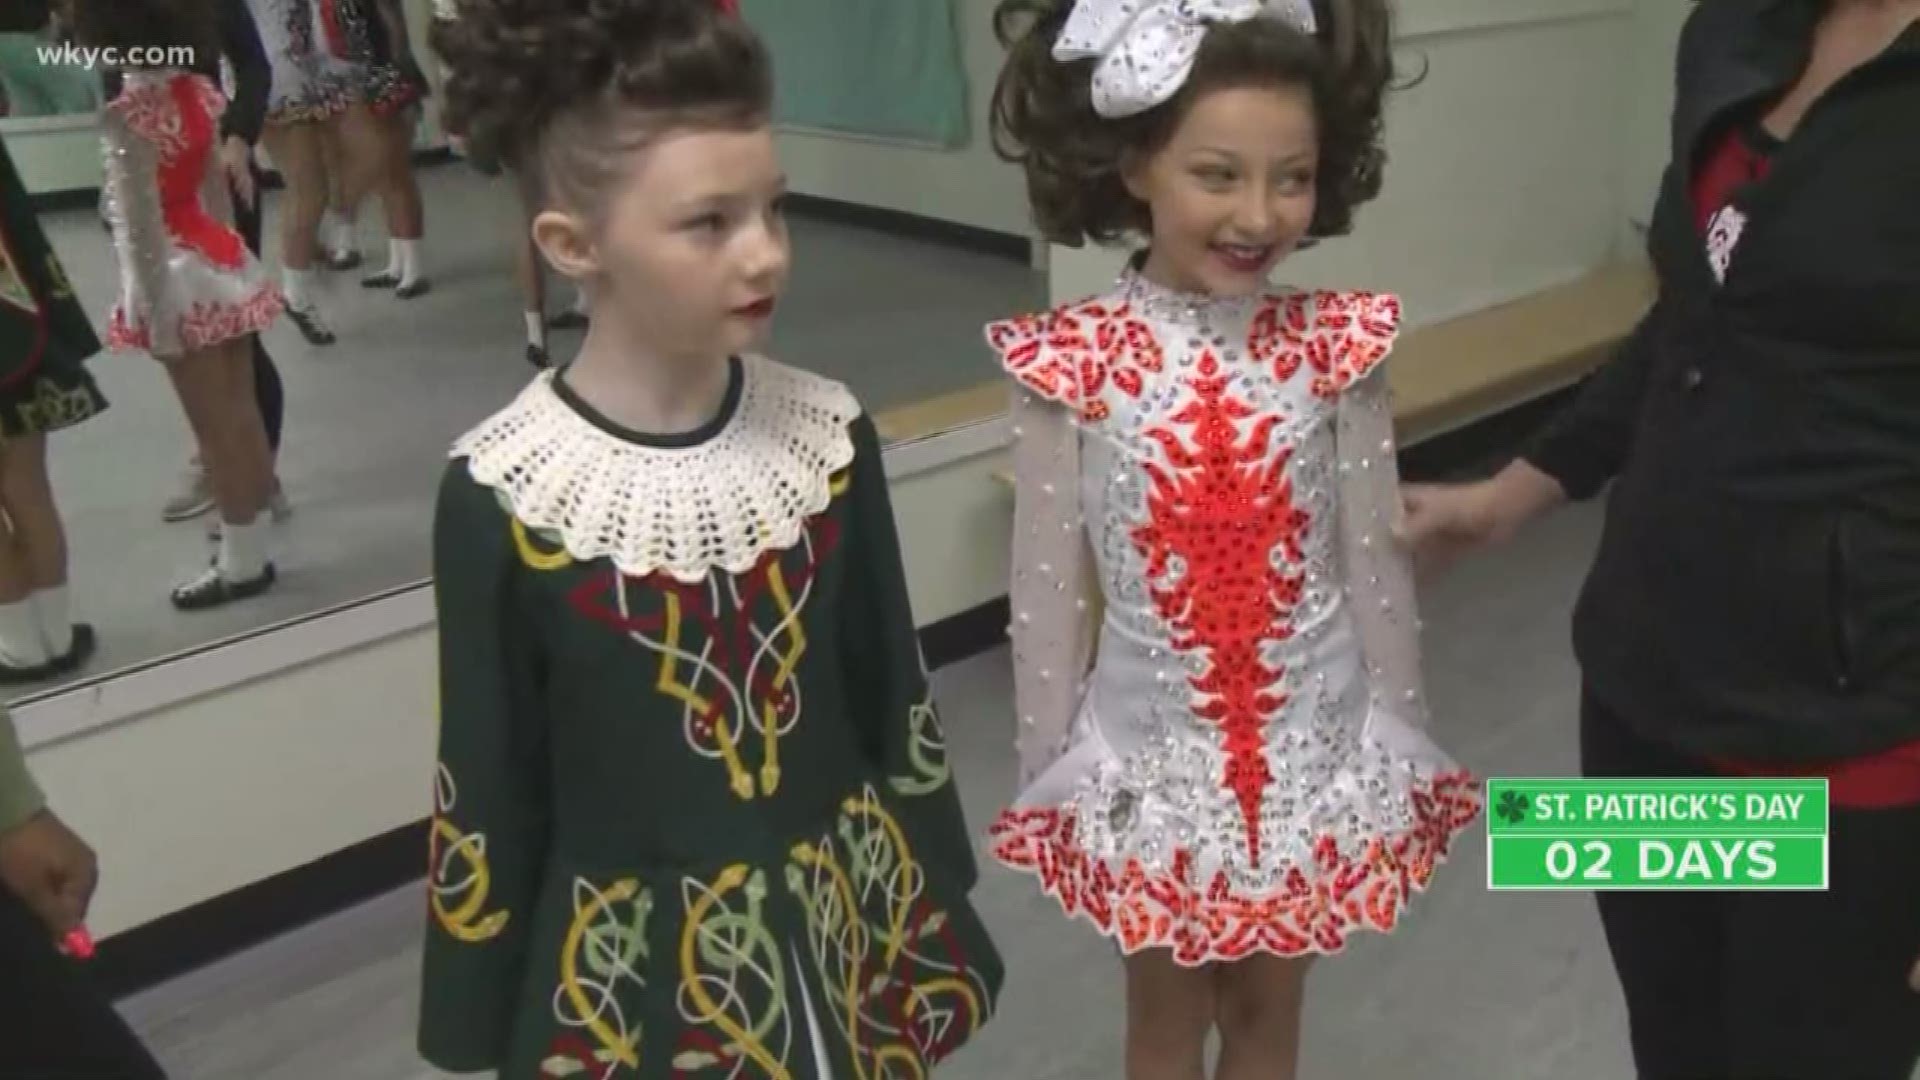 March 15, 2019: It wouldn't be St. Patrick's Day without some Irish dancing.